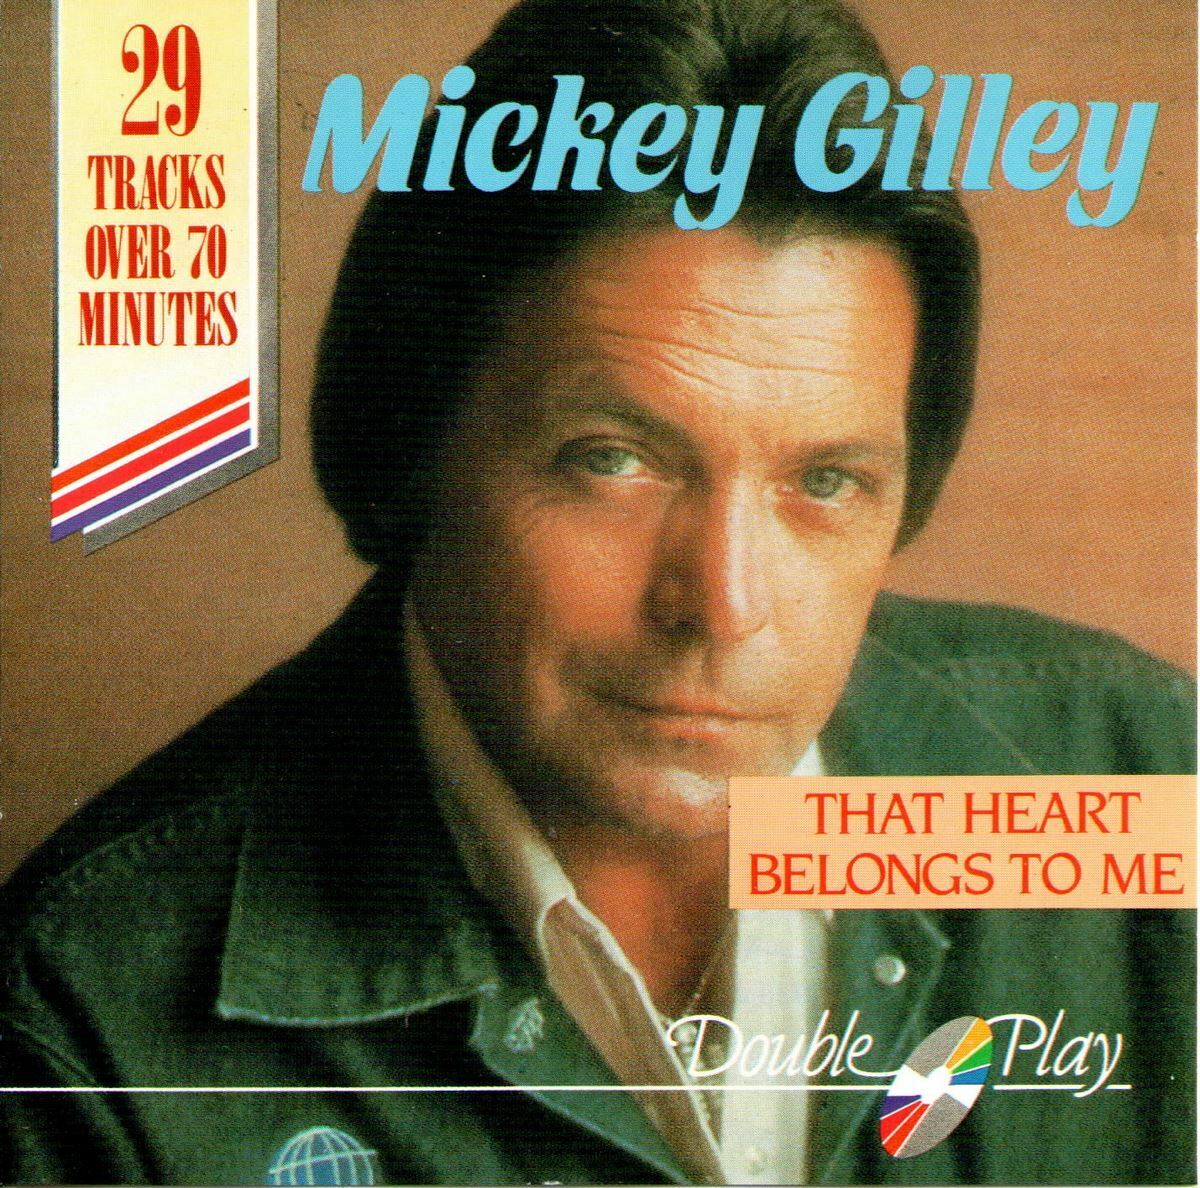 Mickey Gilley - That Heart Belongs To Me